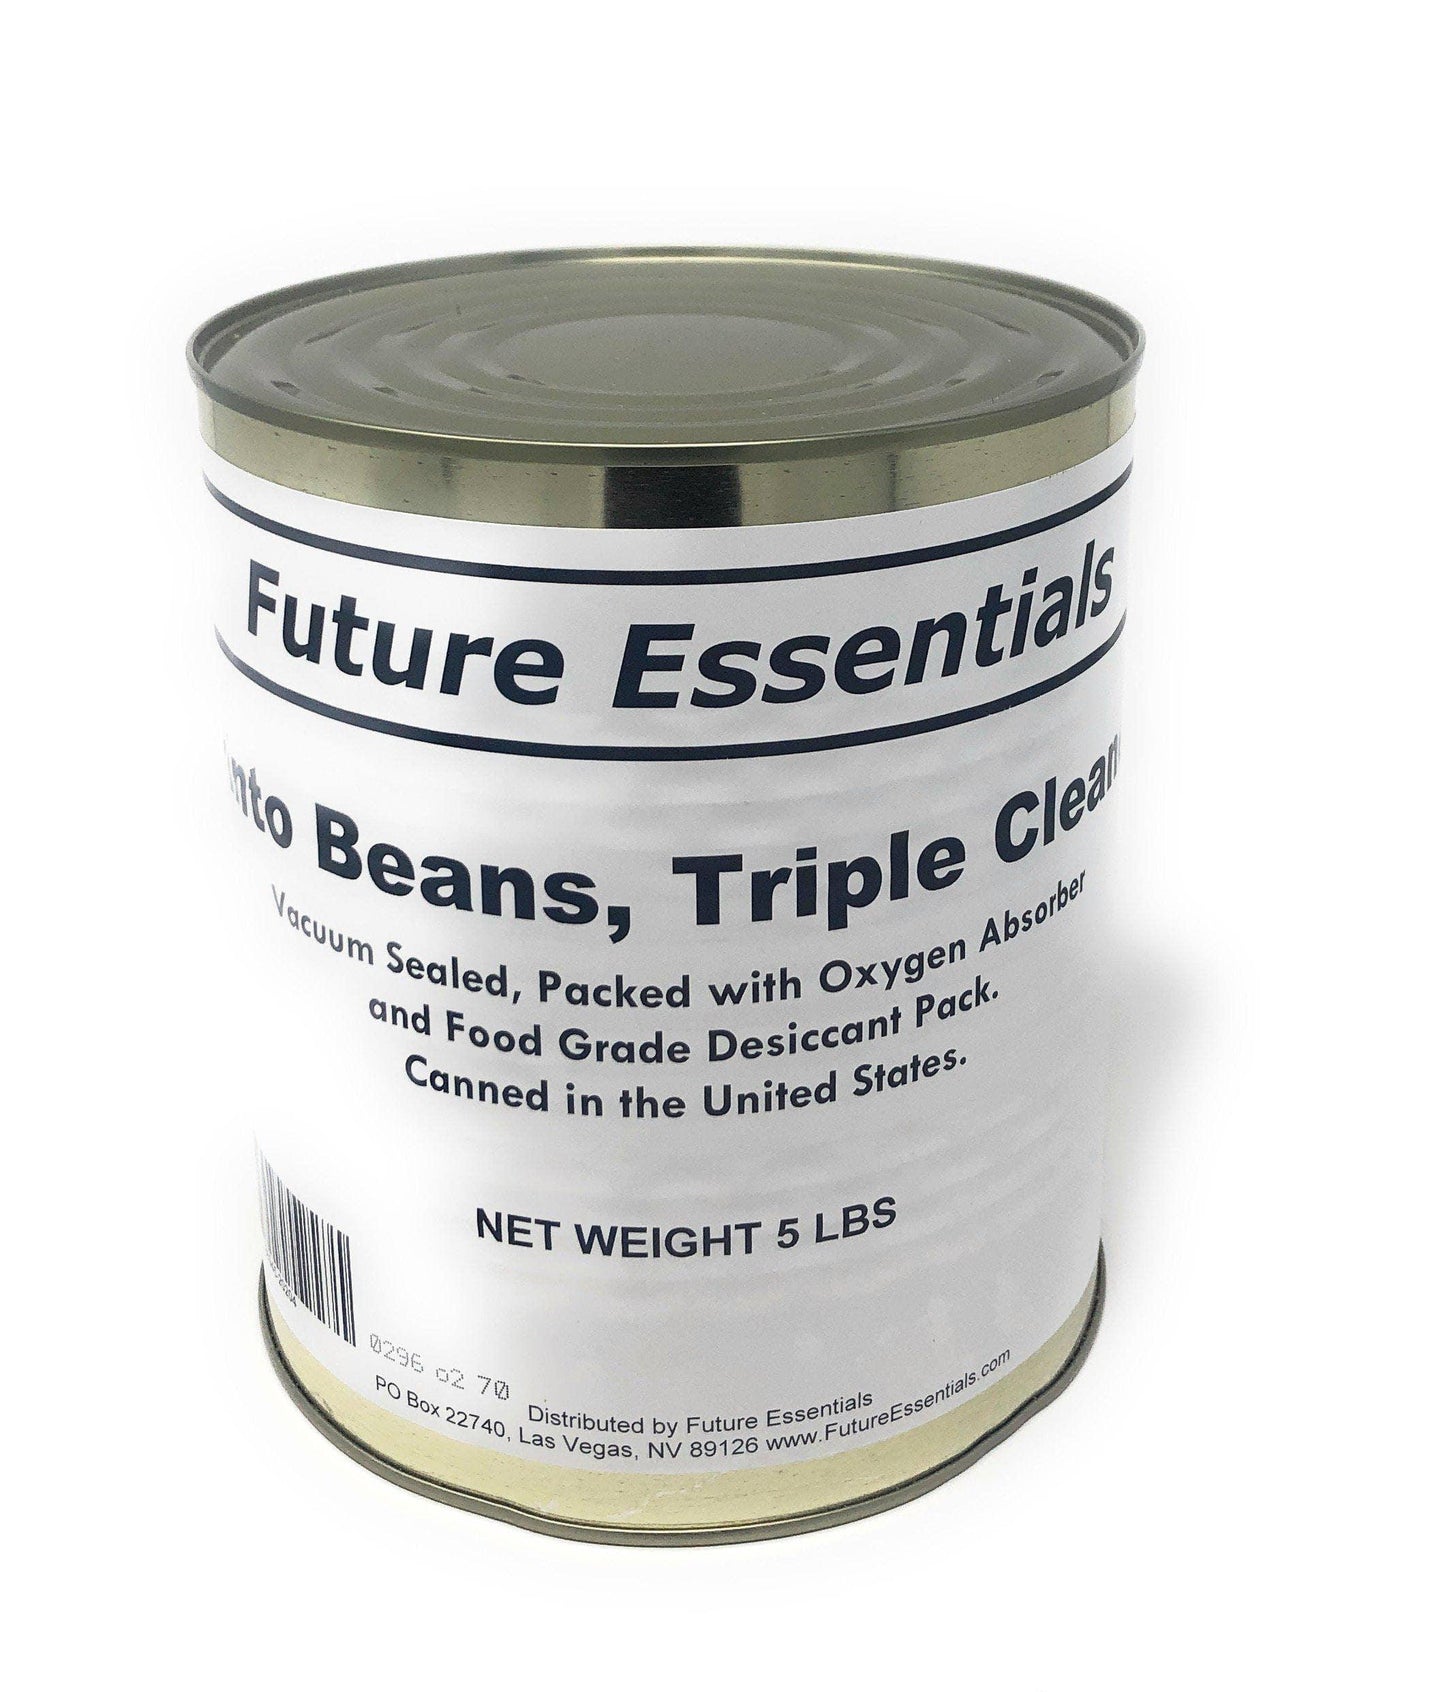 Case of Future Essentials Pinto Beans,(Case of 6 cans)